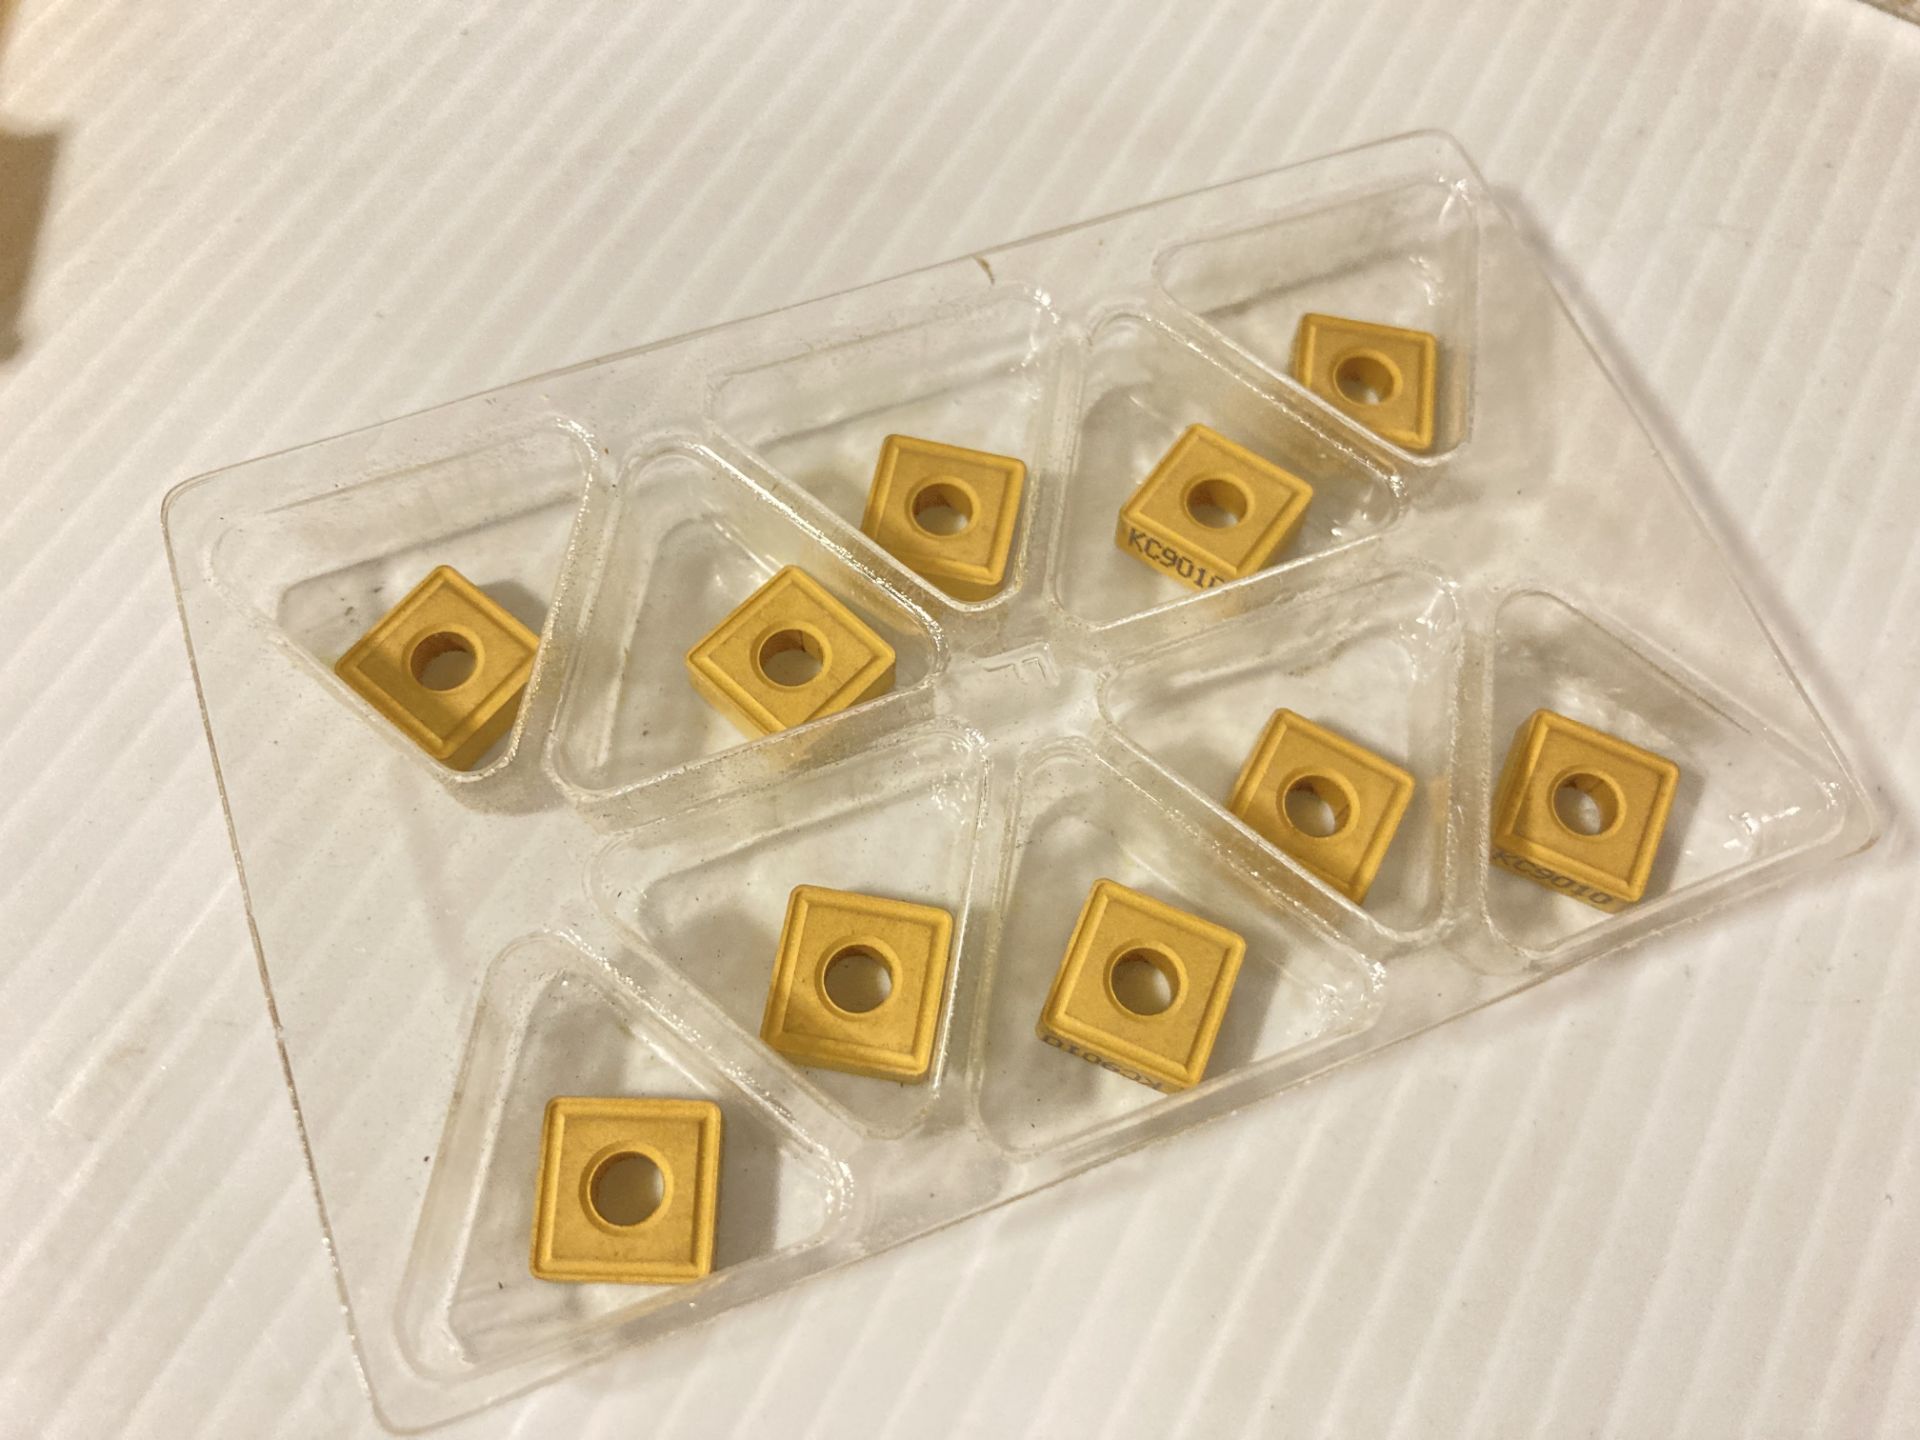 Lot of (70) New? Kennametal Carbide Inserts, P/N: SNMG322 - Image 2 of 3